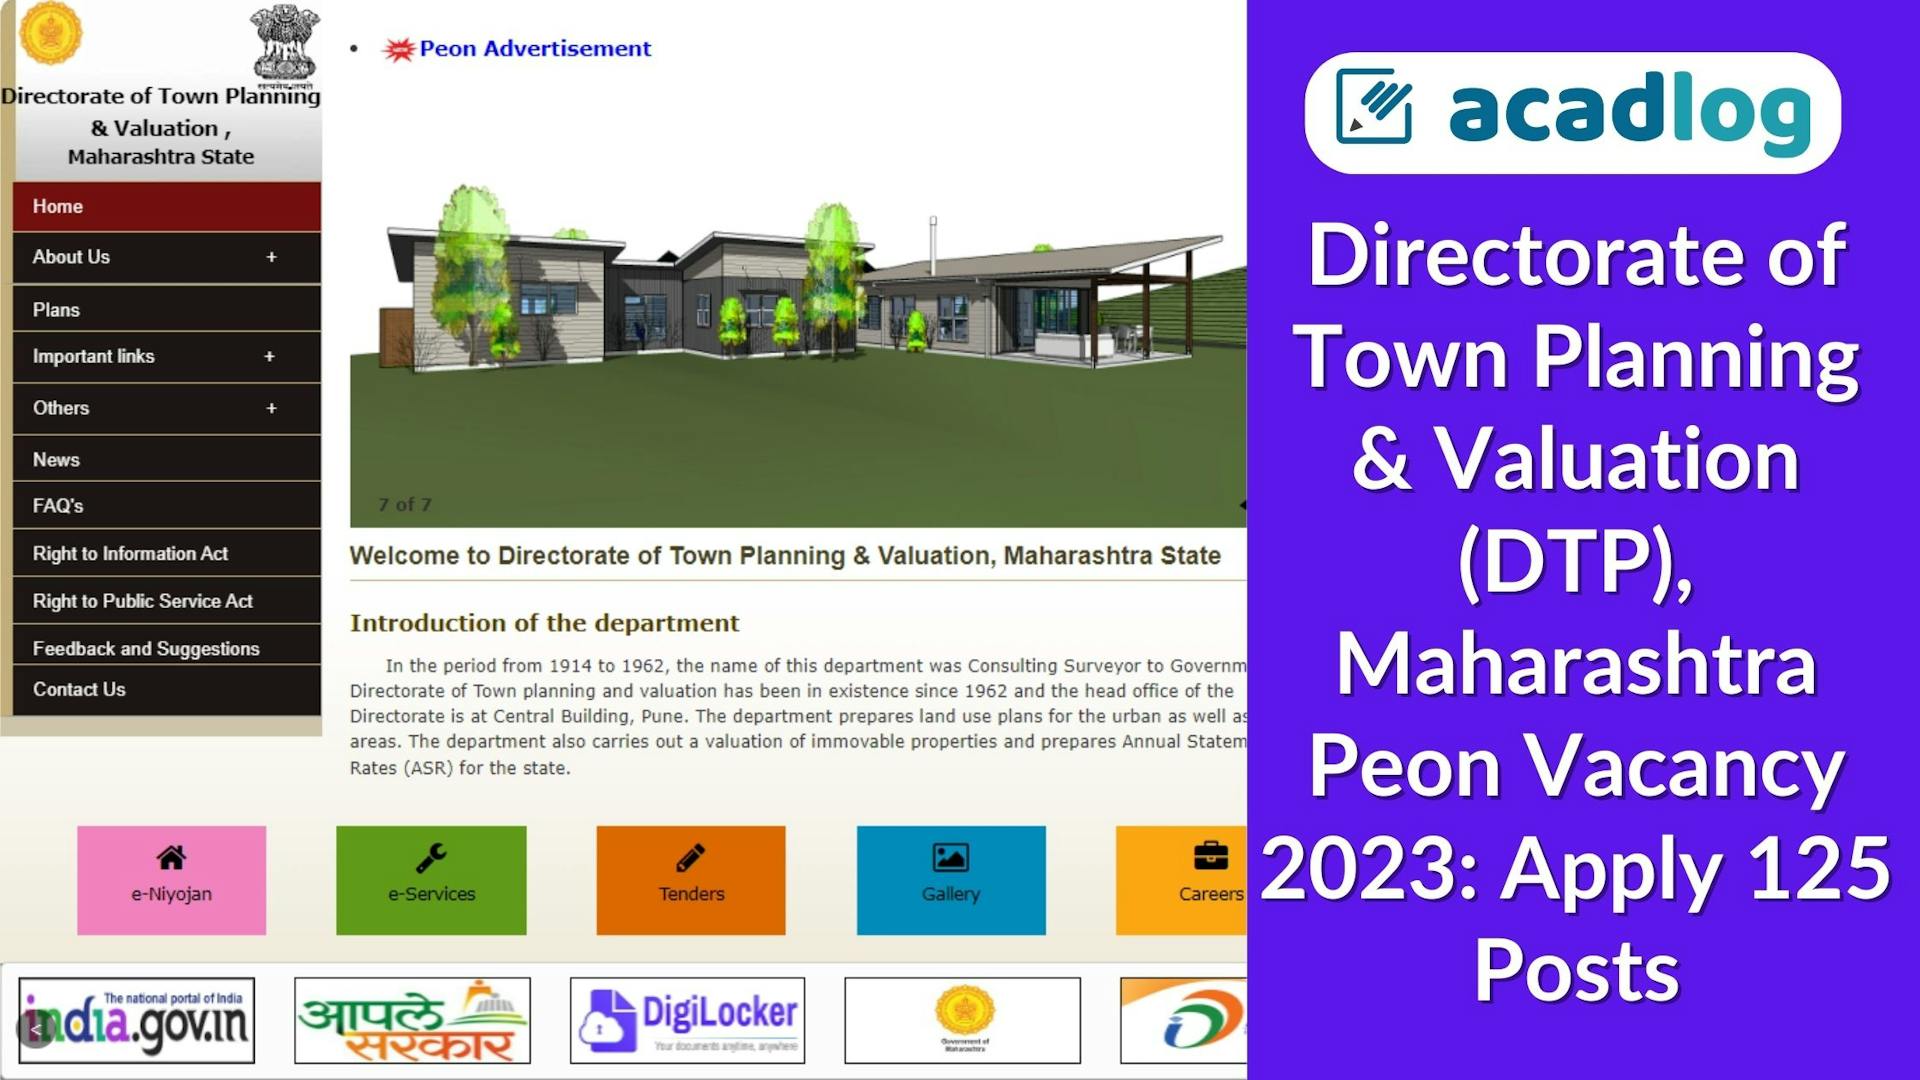 Directorate Town Planning & Valuation (DTP), Maharashtra Peon Vacancy 2023: Apply 125 Posts